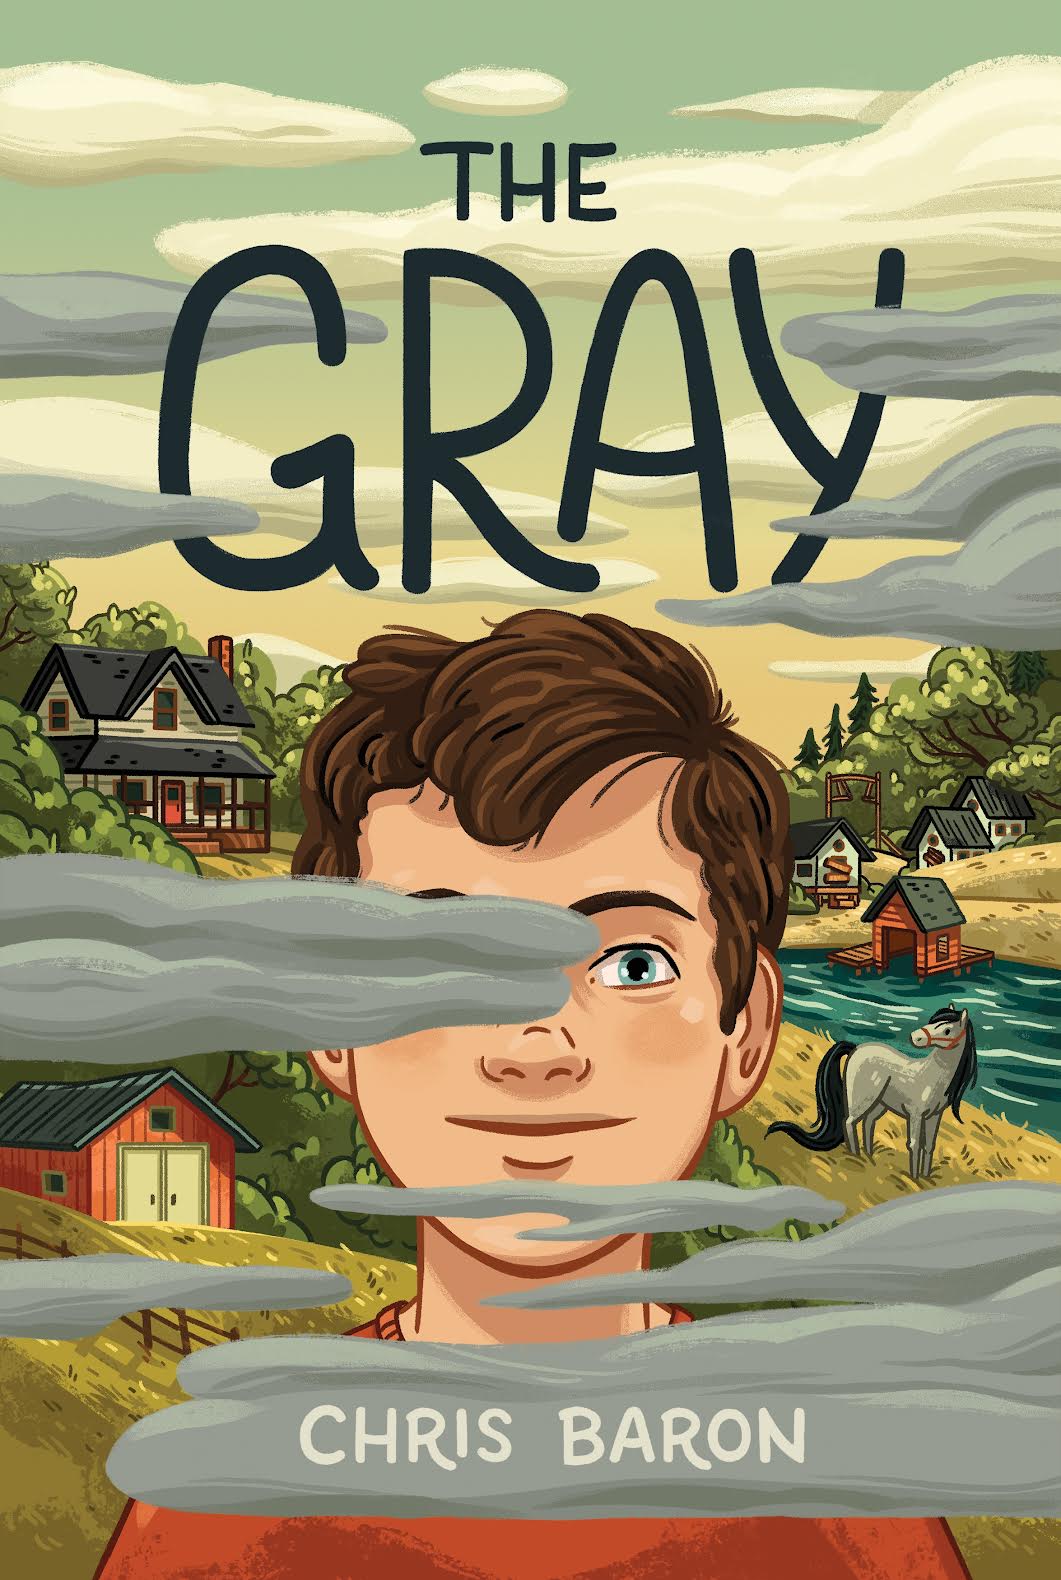 Excerpt Time!  Read the Beginning of “The Gray” by Chris Baron